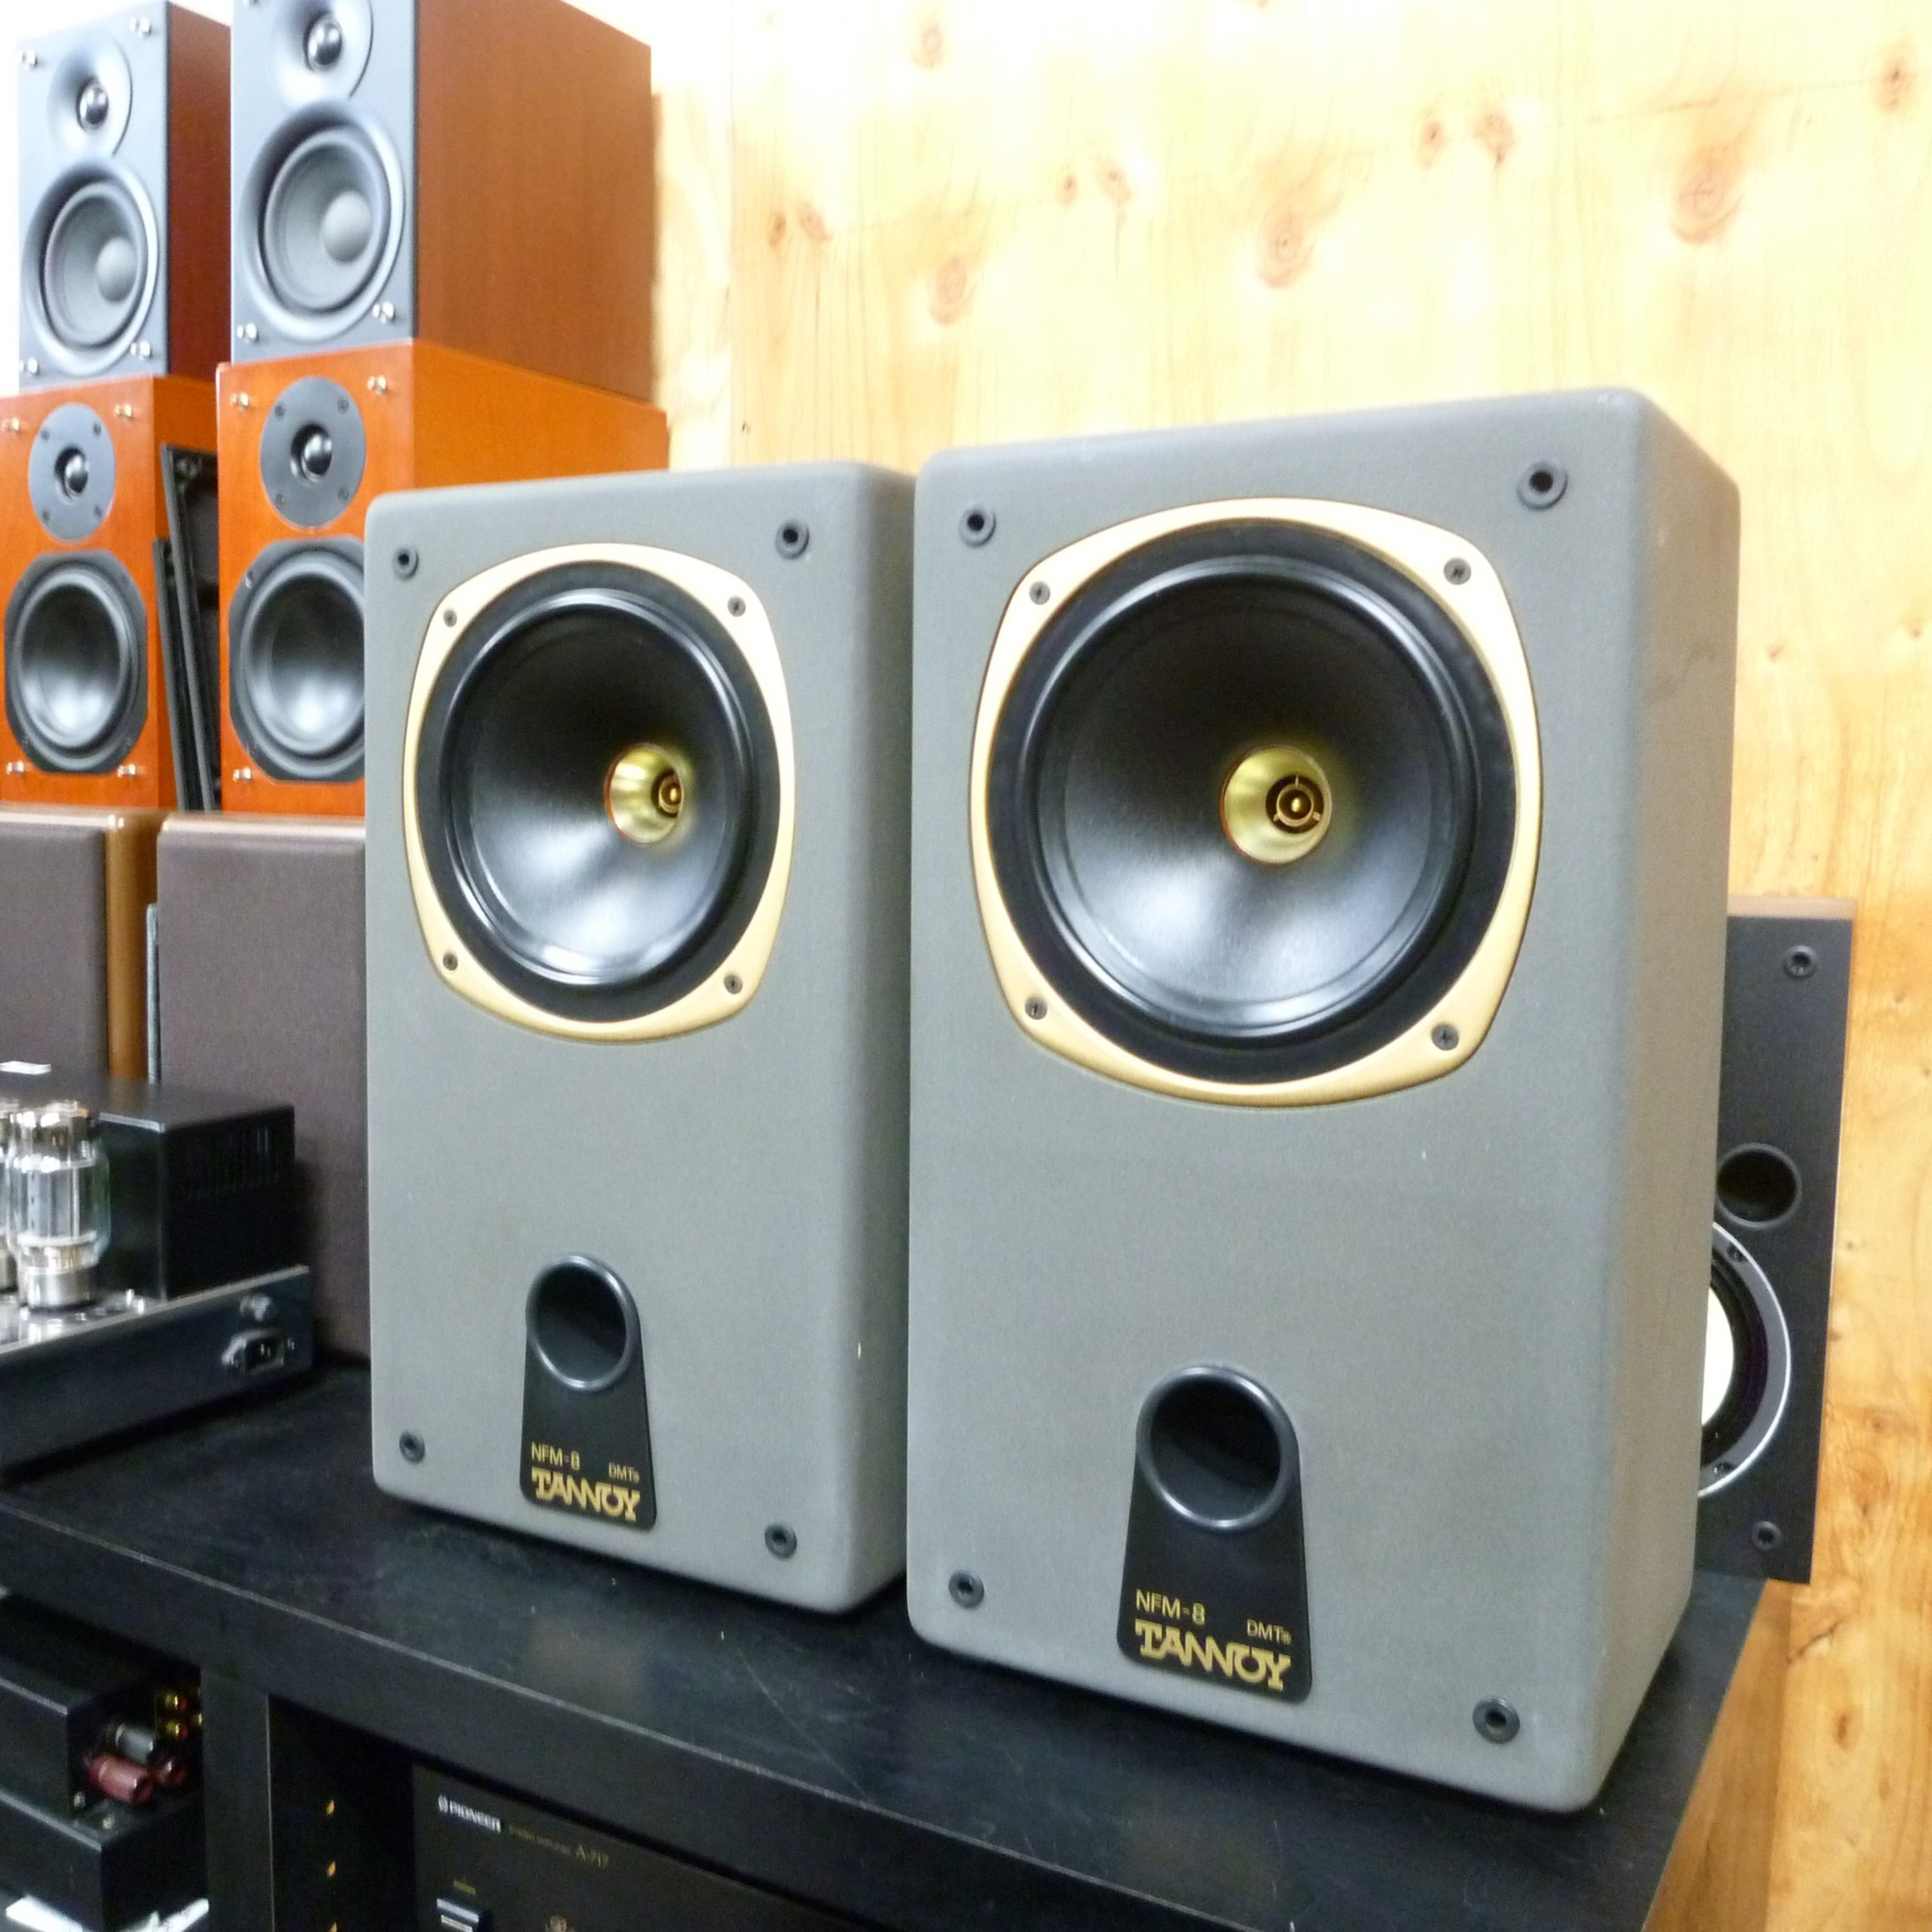 TANNOY / NFM-8